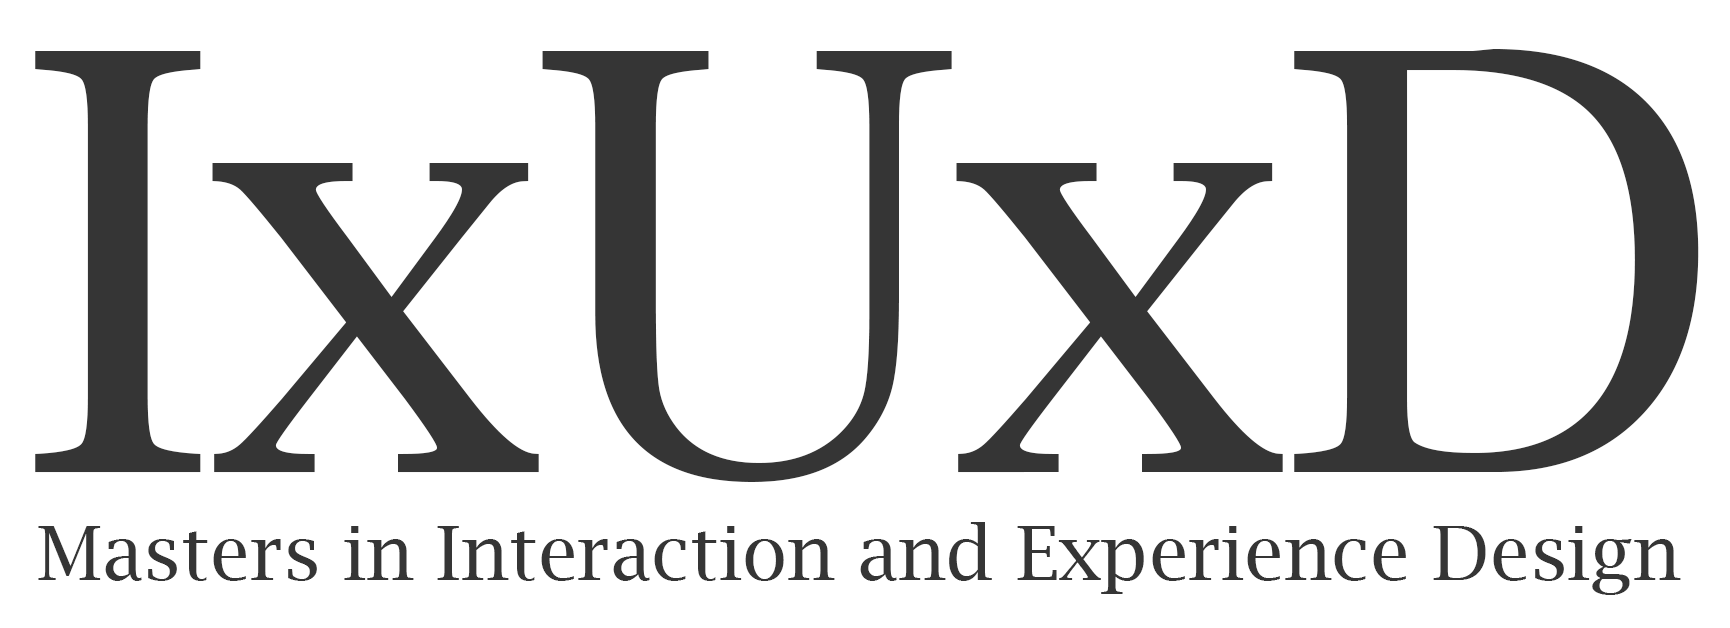 Interaction and Experience design